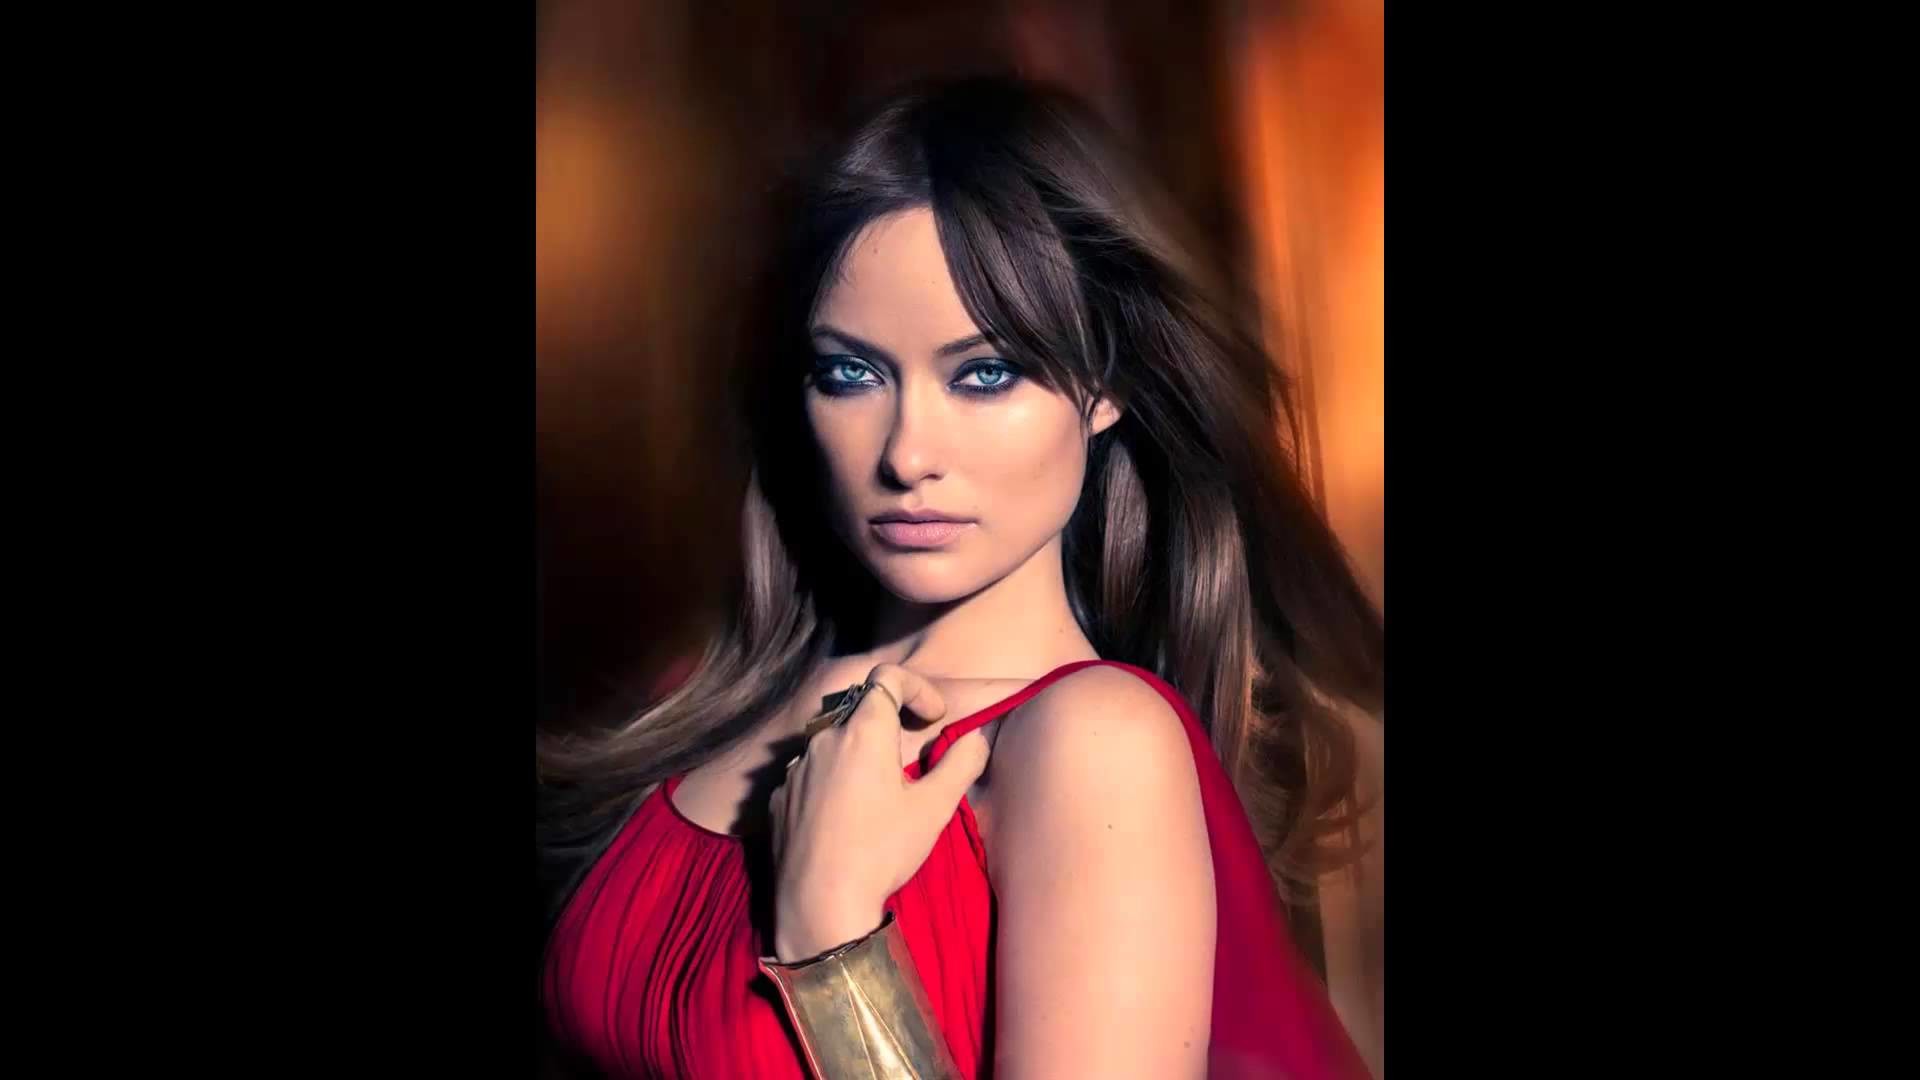 Olivia Wilde Sexy Pictures Hd 1080p 
 Data Src Best - Olivia Wilde Magazine Covers - HD Wallpaper 